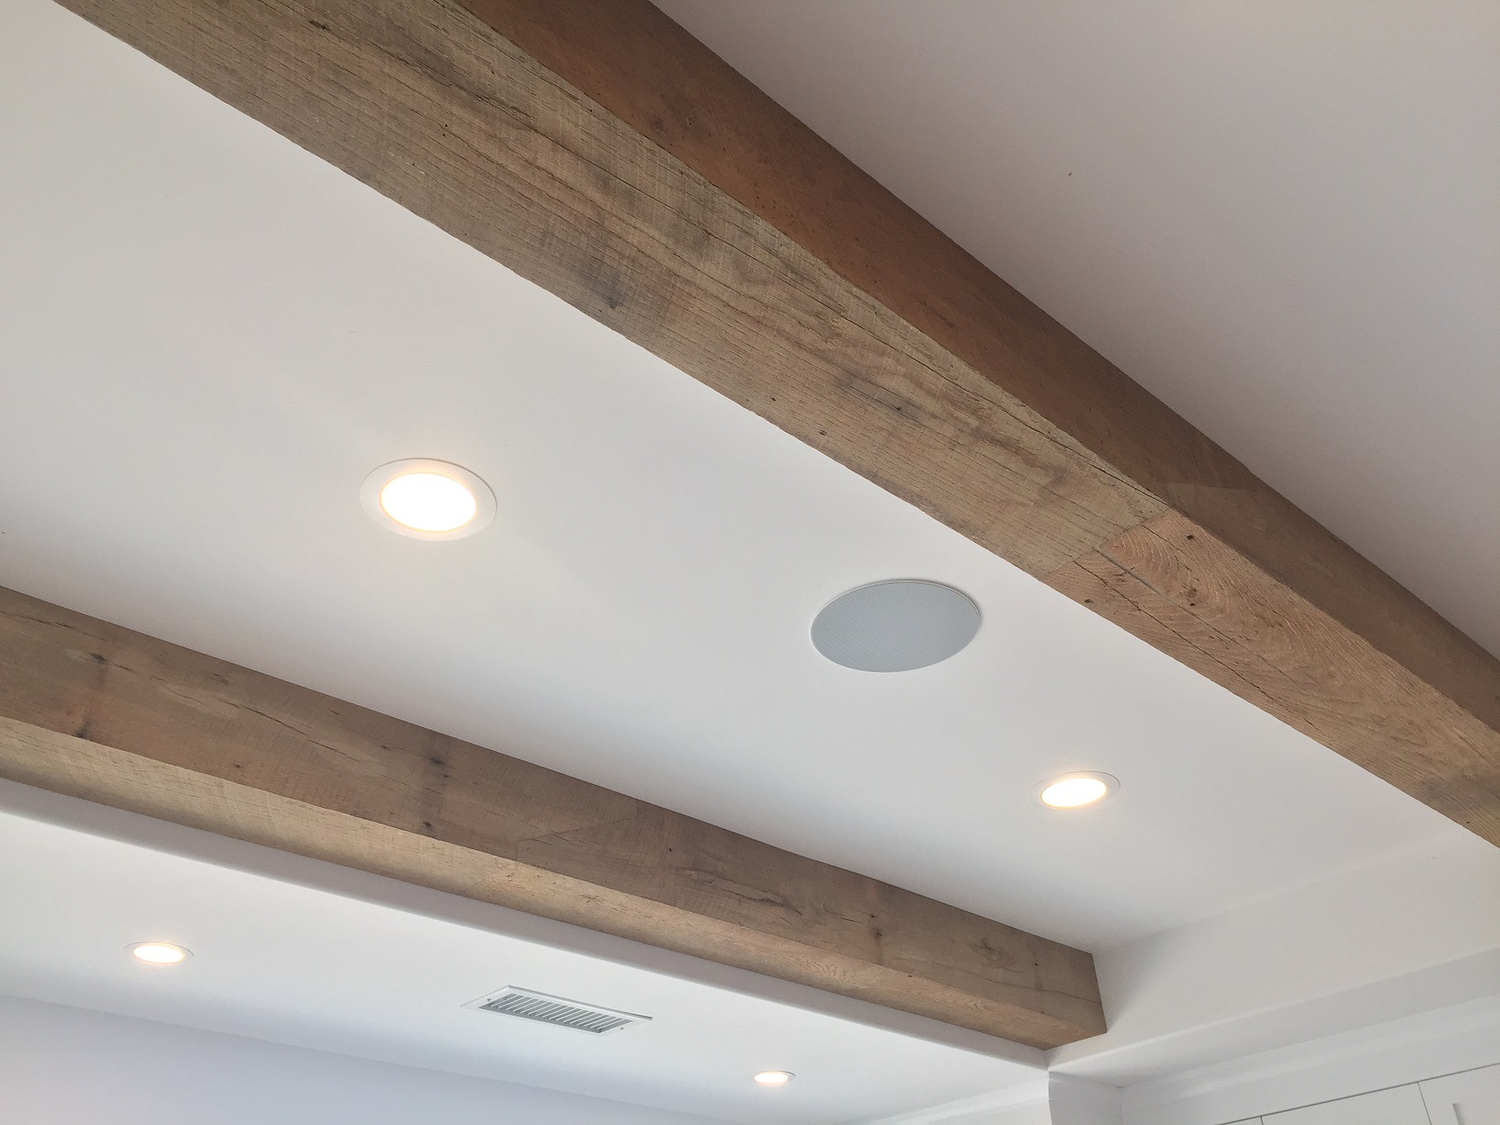 Choose Your Material for Ceiling Box Beams